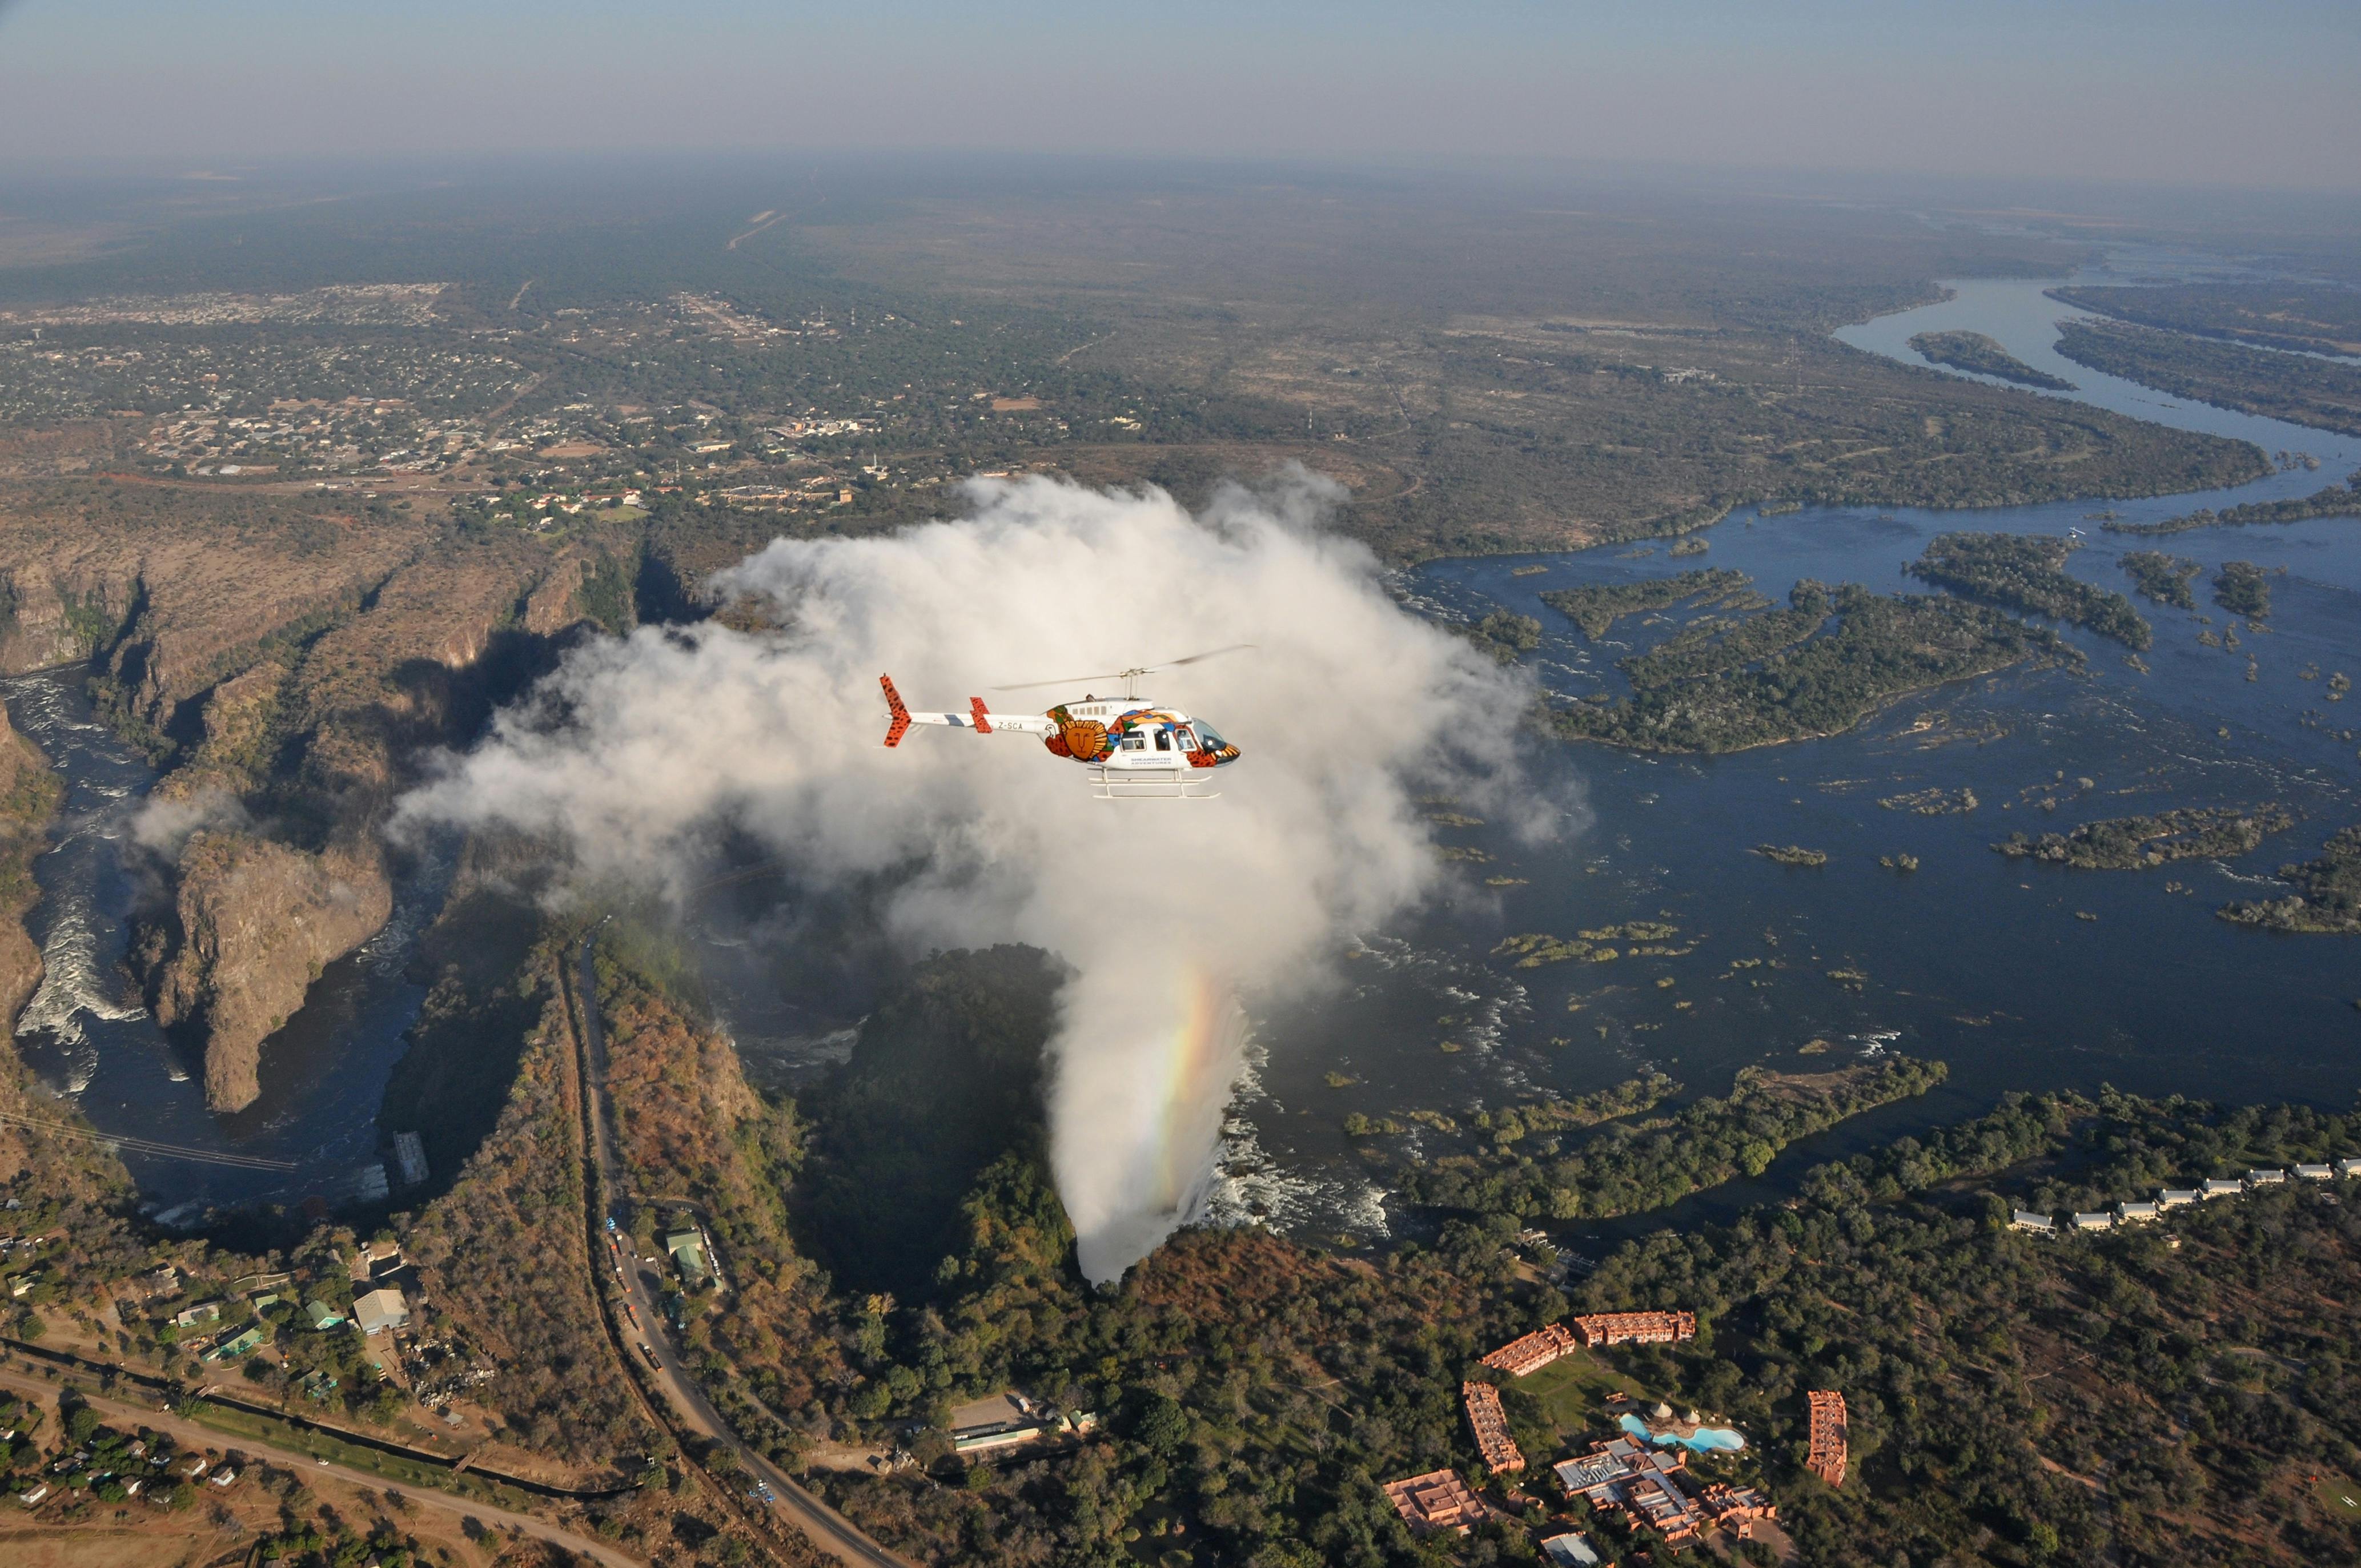 12-minute helicopter flight at Victoria Falls from Zimbabwe side